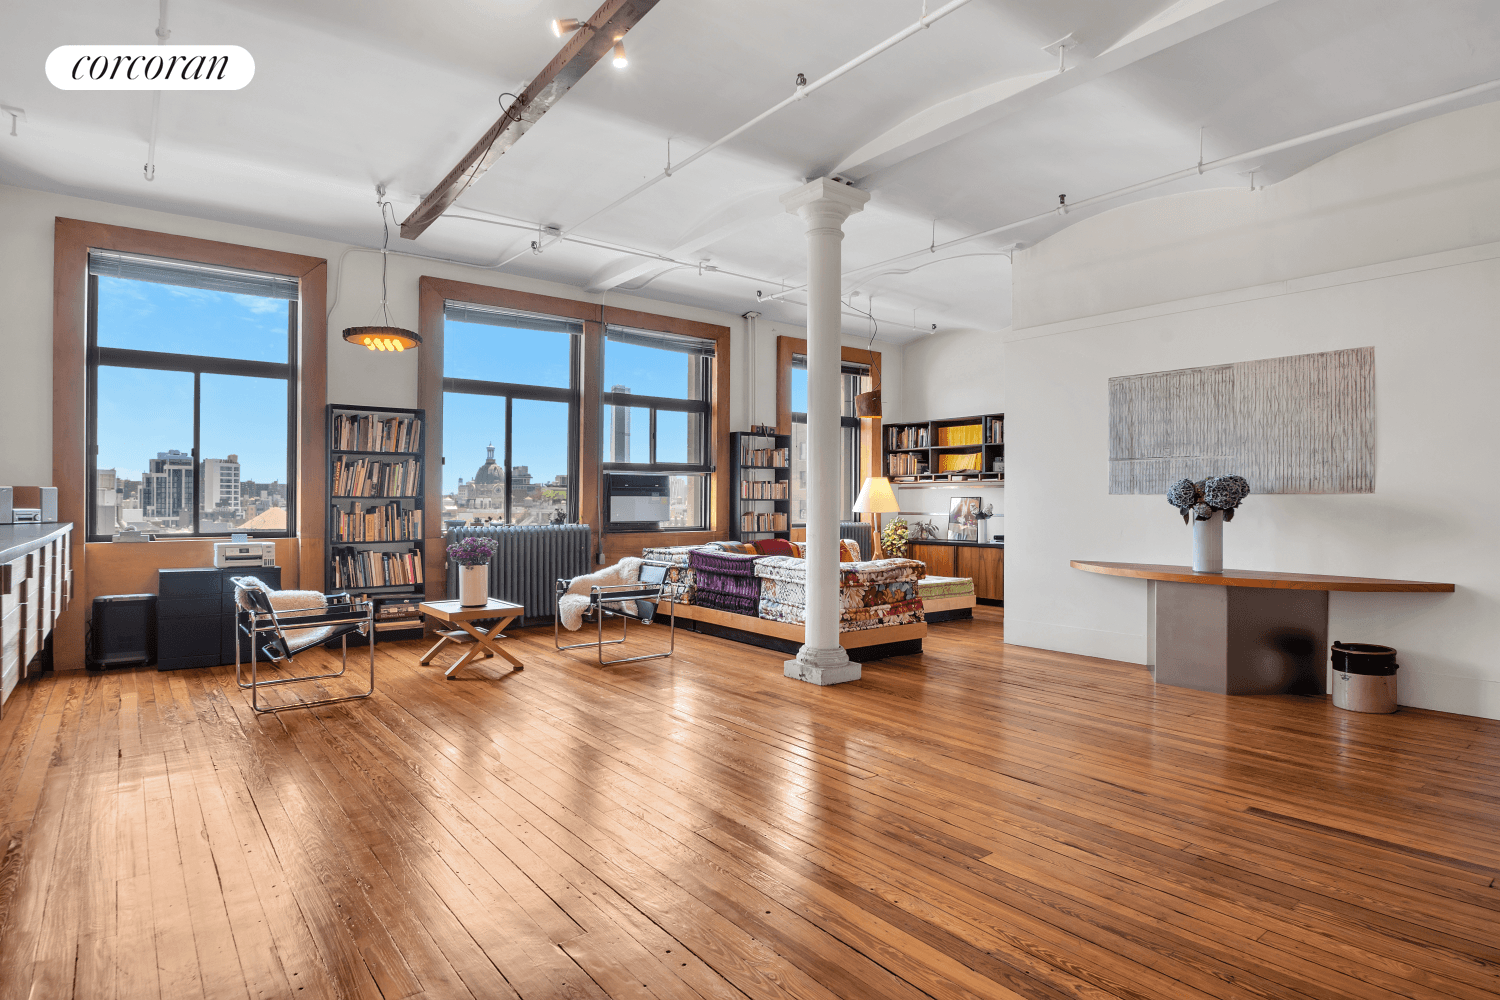 The 9th floor at 491 Broadway is a classic, full floor SoHo loft, available for the first time in nearly half a century.